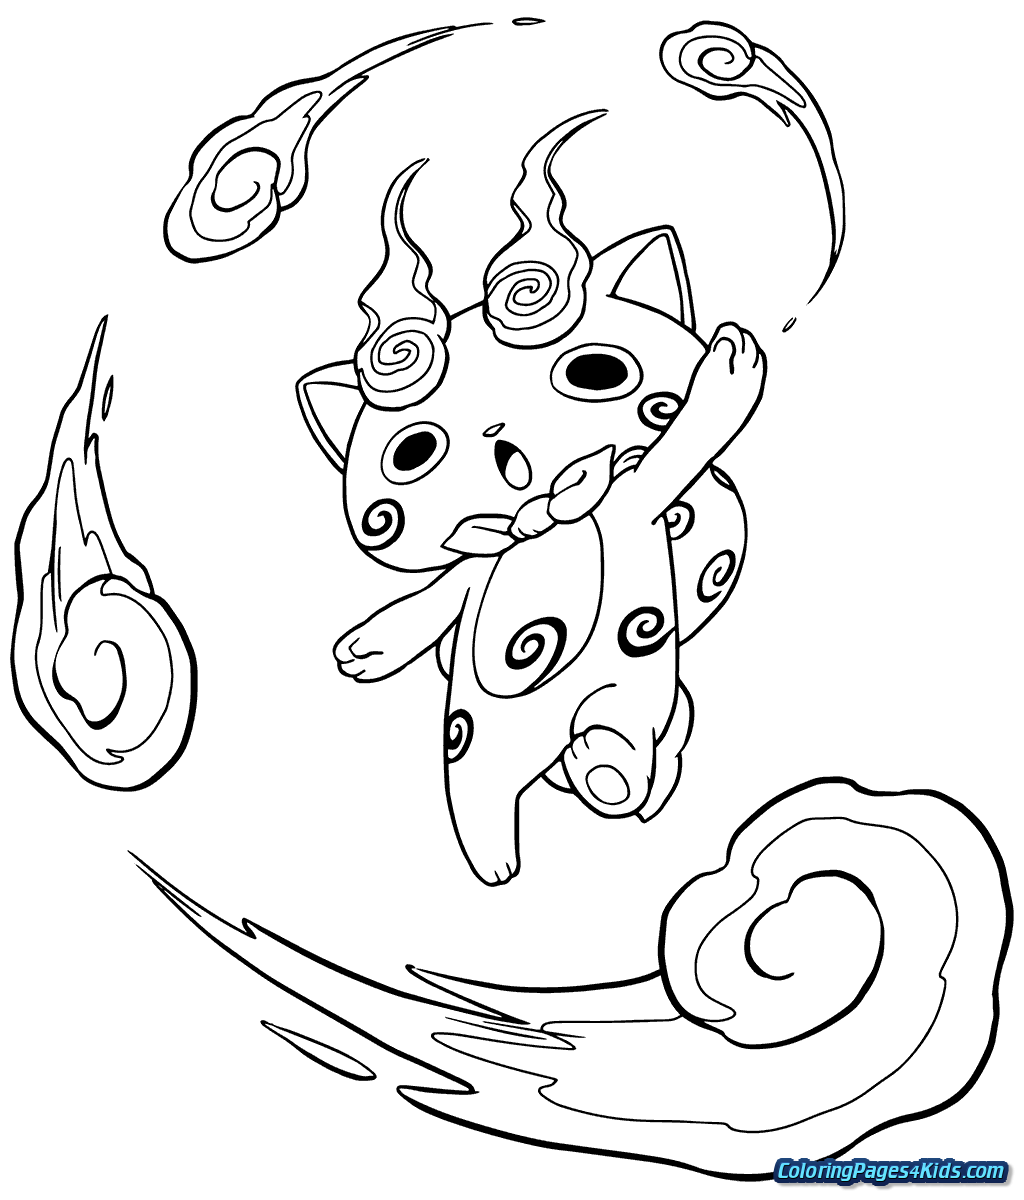 coloring pages yo kai watch - Coloring Pages For Kids